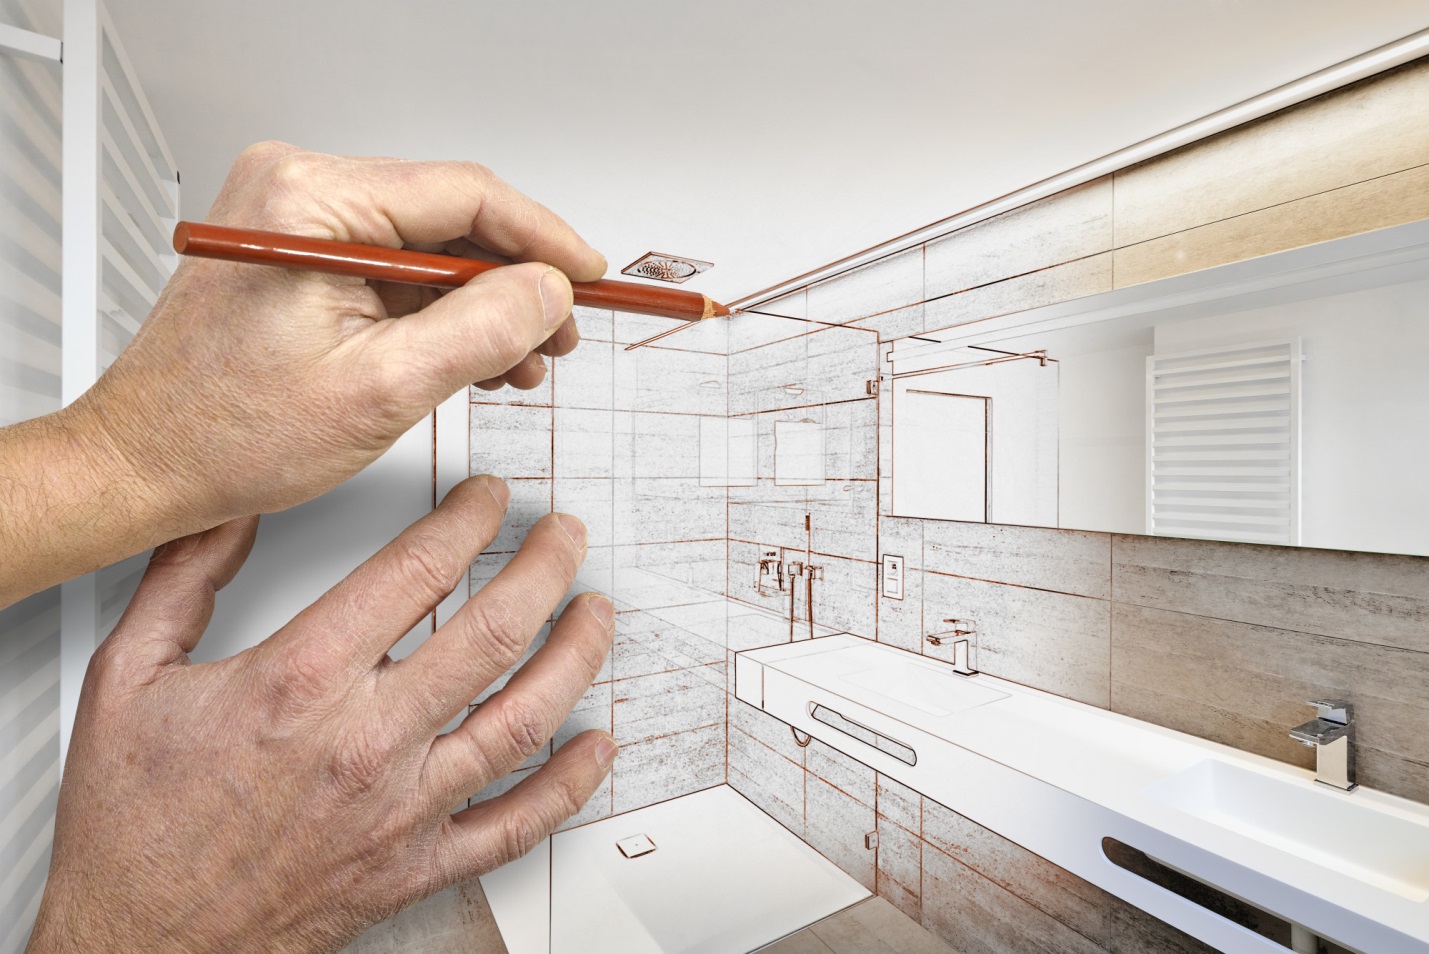 How Long Should a Bathroom Remodel Take? Planning the project for bathroom